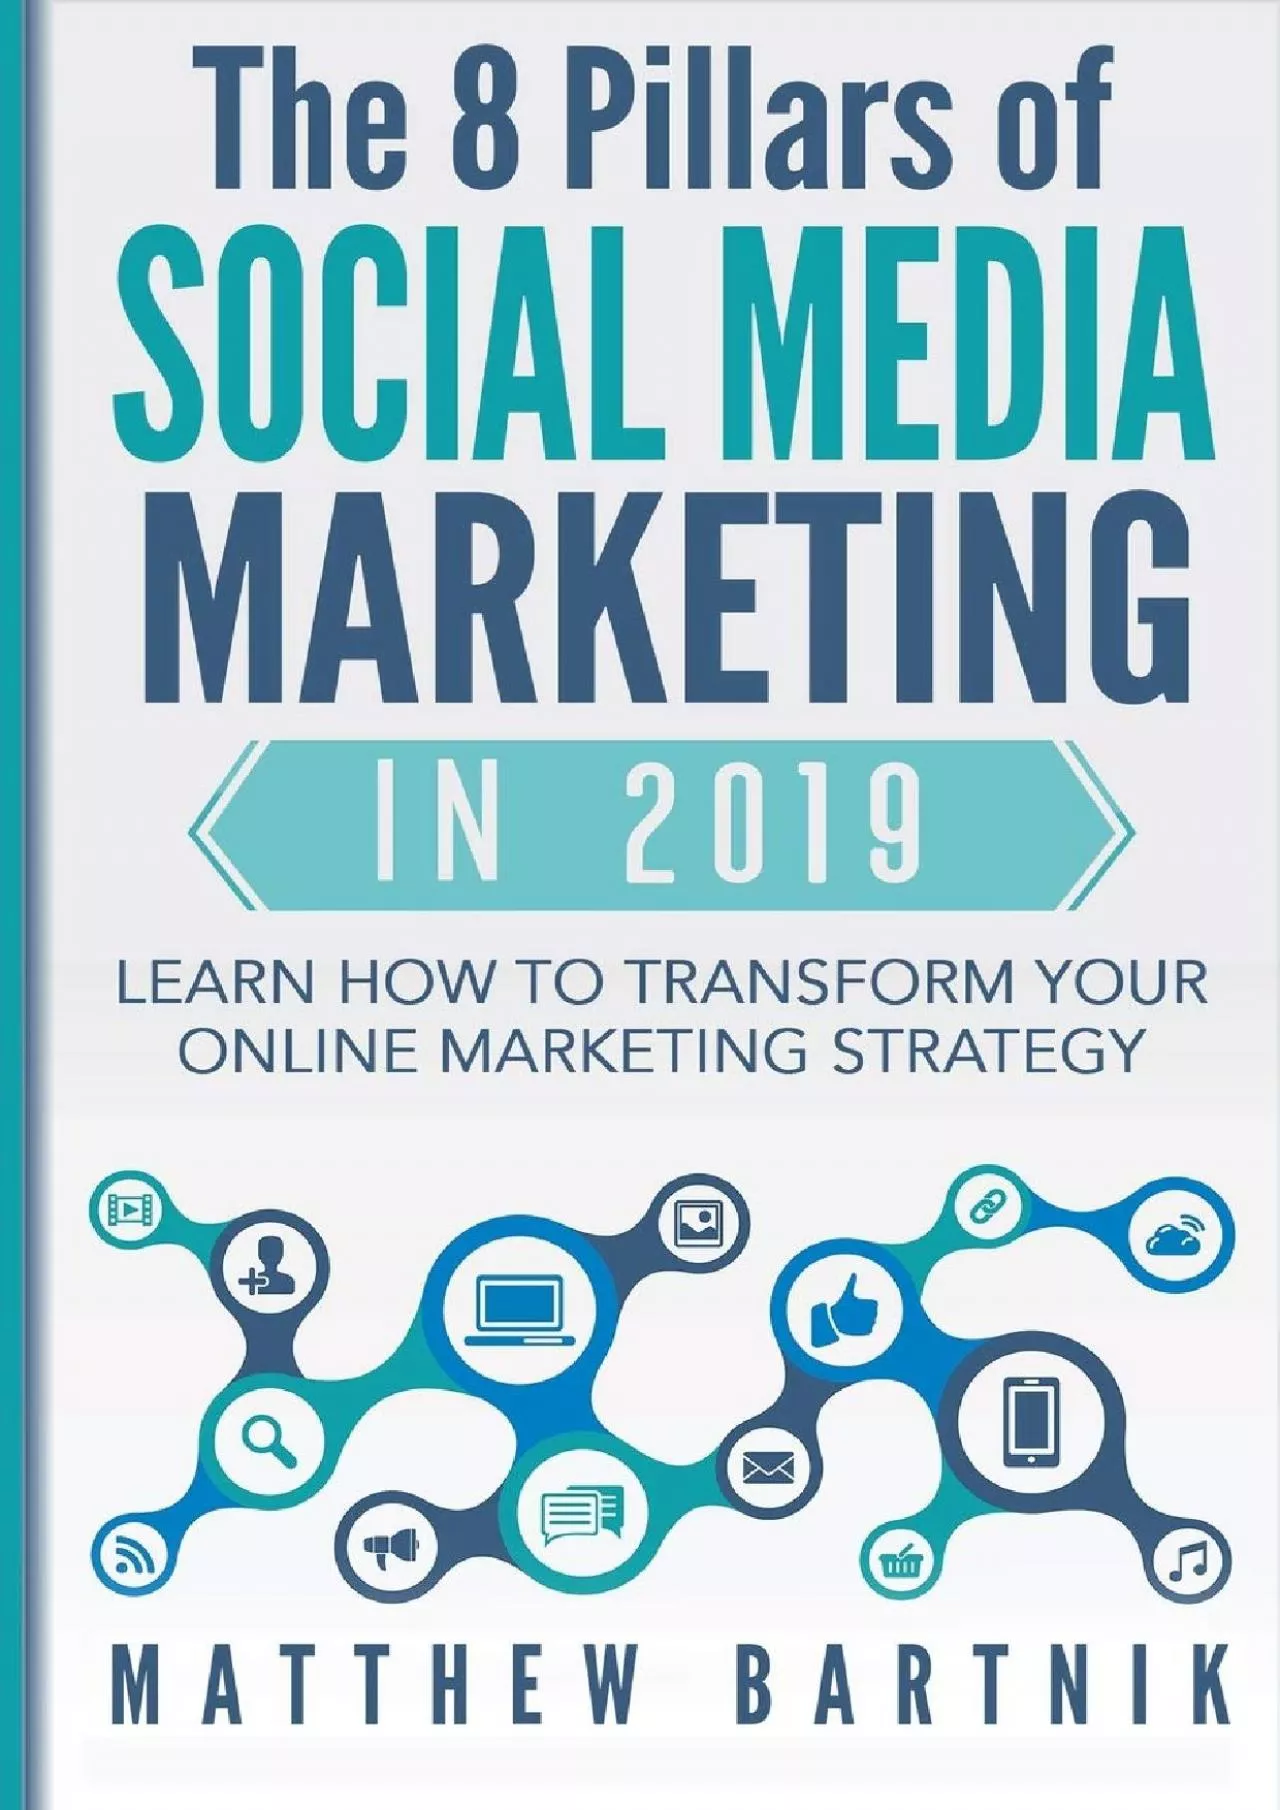 The 8 Pillars of Social Media Marketing in 2019: Learn How to Transform Your Online Marketing